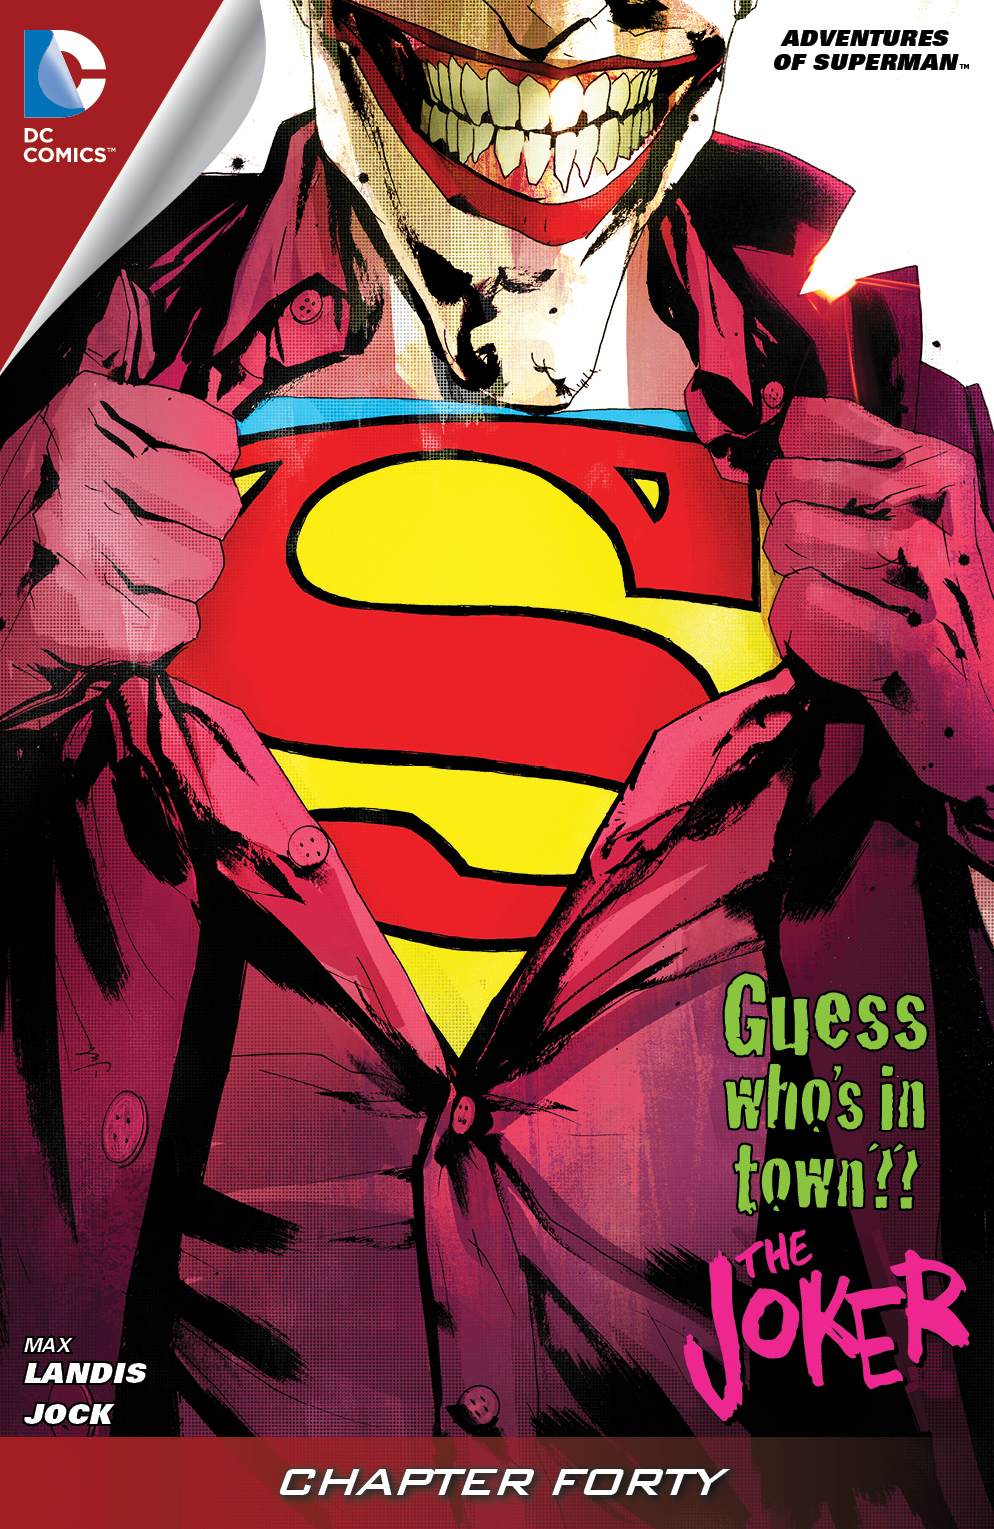 Adventures of Superman (2013-) #40 preview images